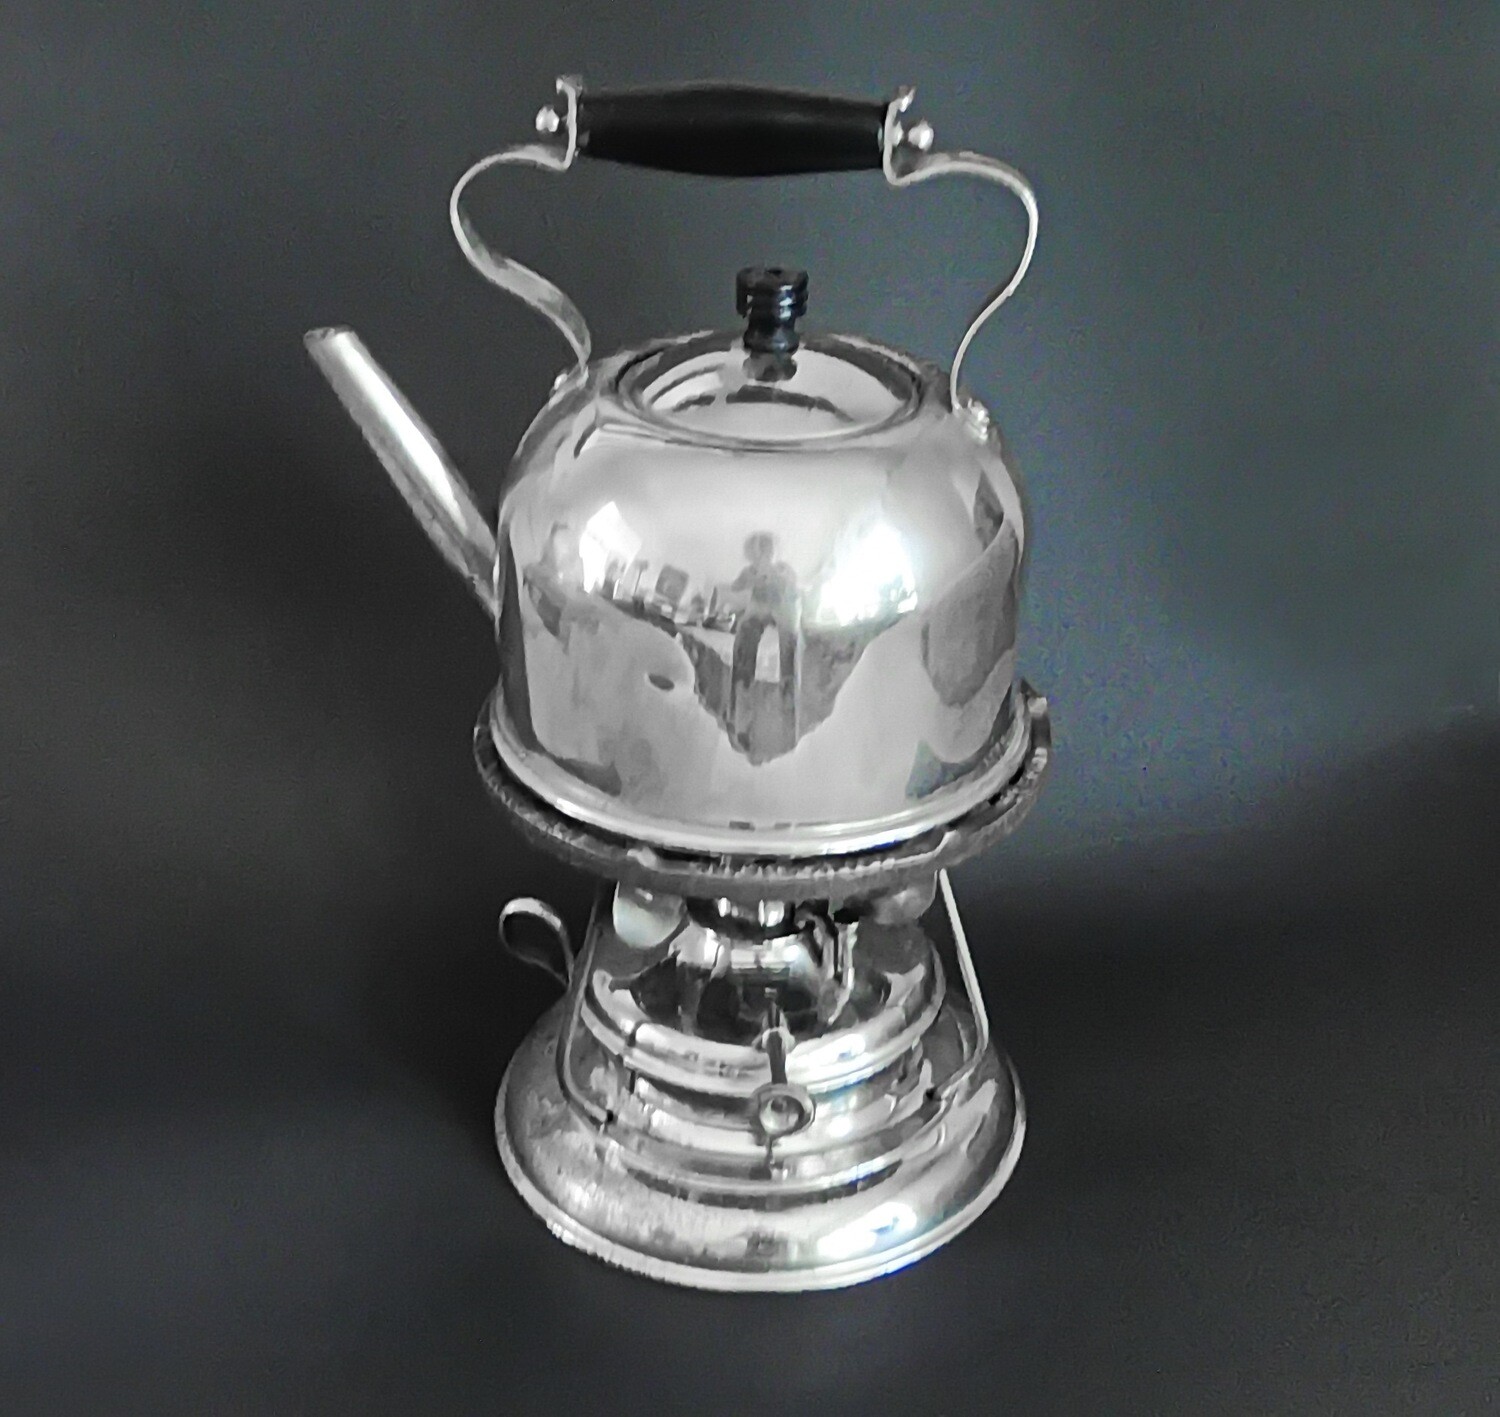 Antique American Portable Alcohol Camp Stove and Kettle c. 1910